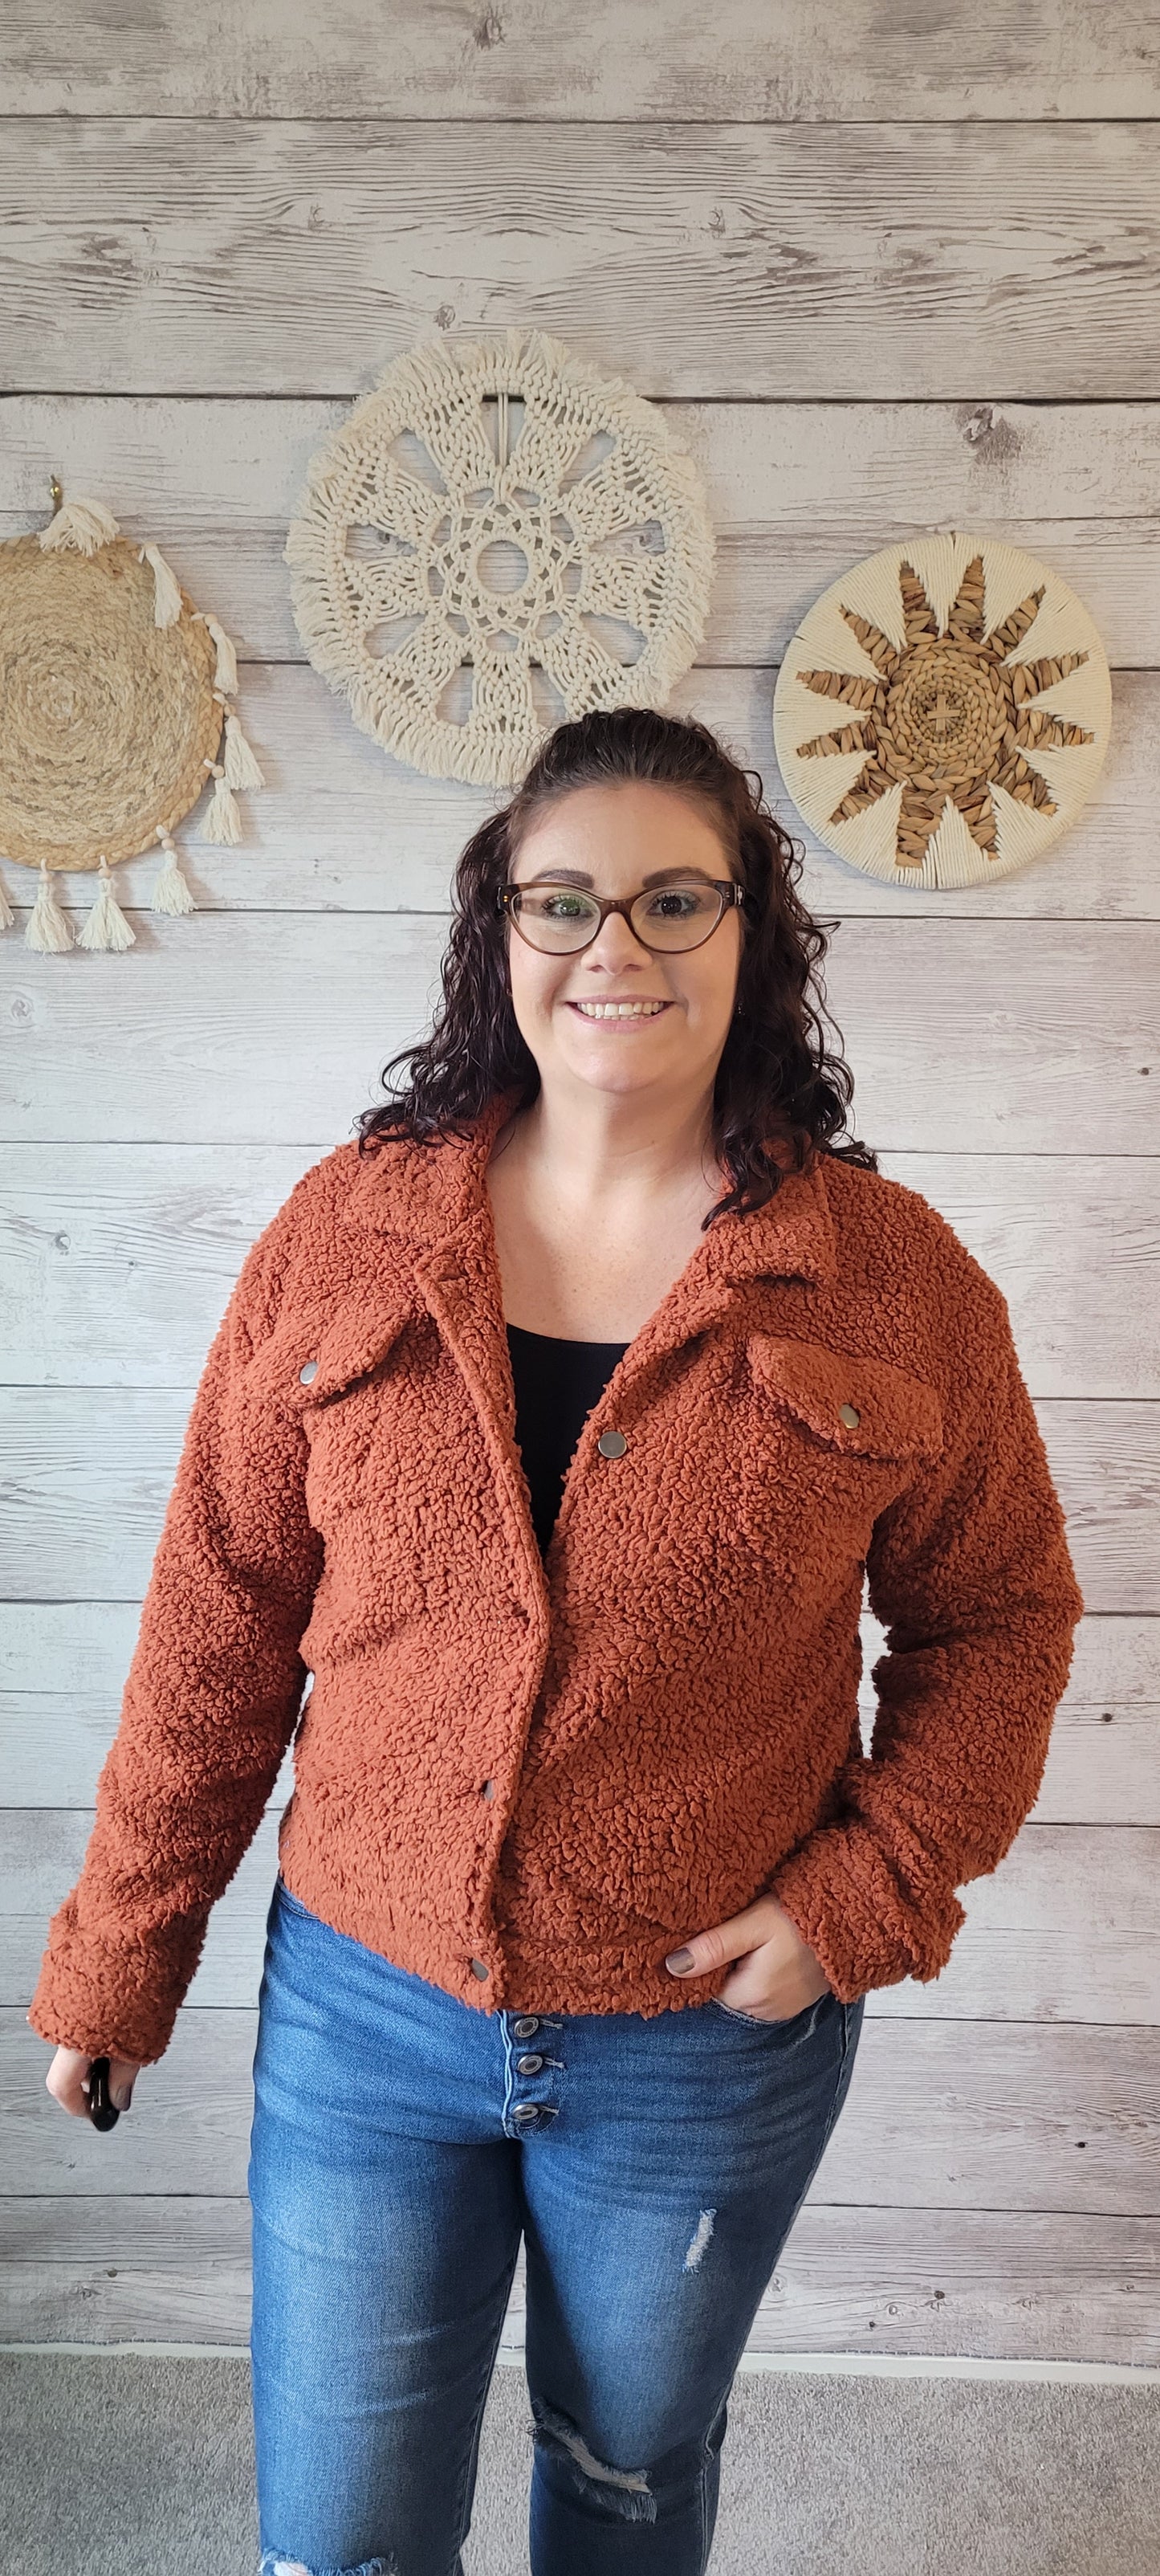 The perfect winter companion has arrived! Look no further than this "Marley Rust Fleece Jacket", featuring a button-down front closure and flap pockets to keep you cozy. Step out in style this season with a jacket that'll keep you looking fresh while beating the chill! Who could ask for more? Sizes small through large.